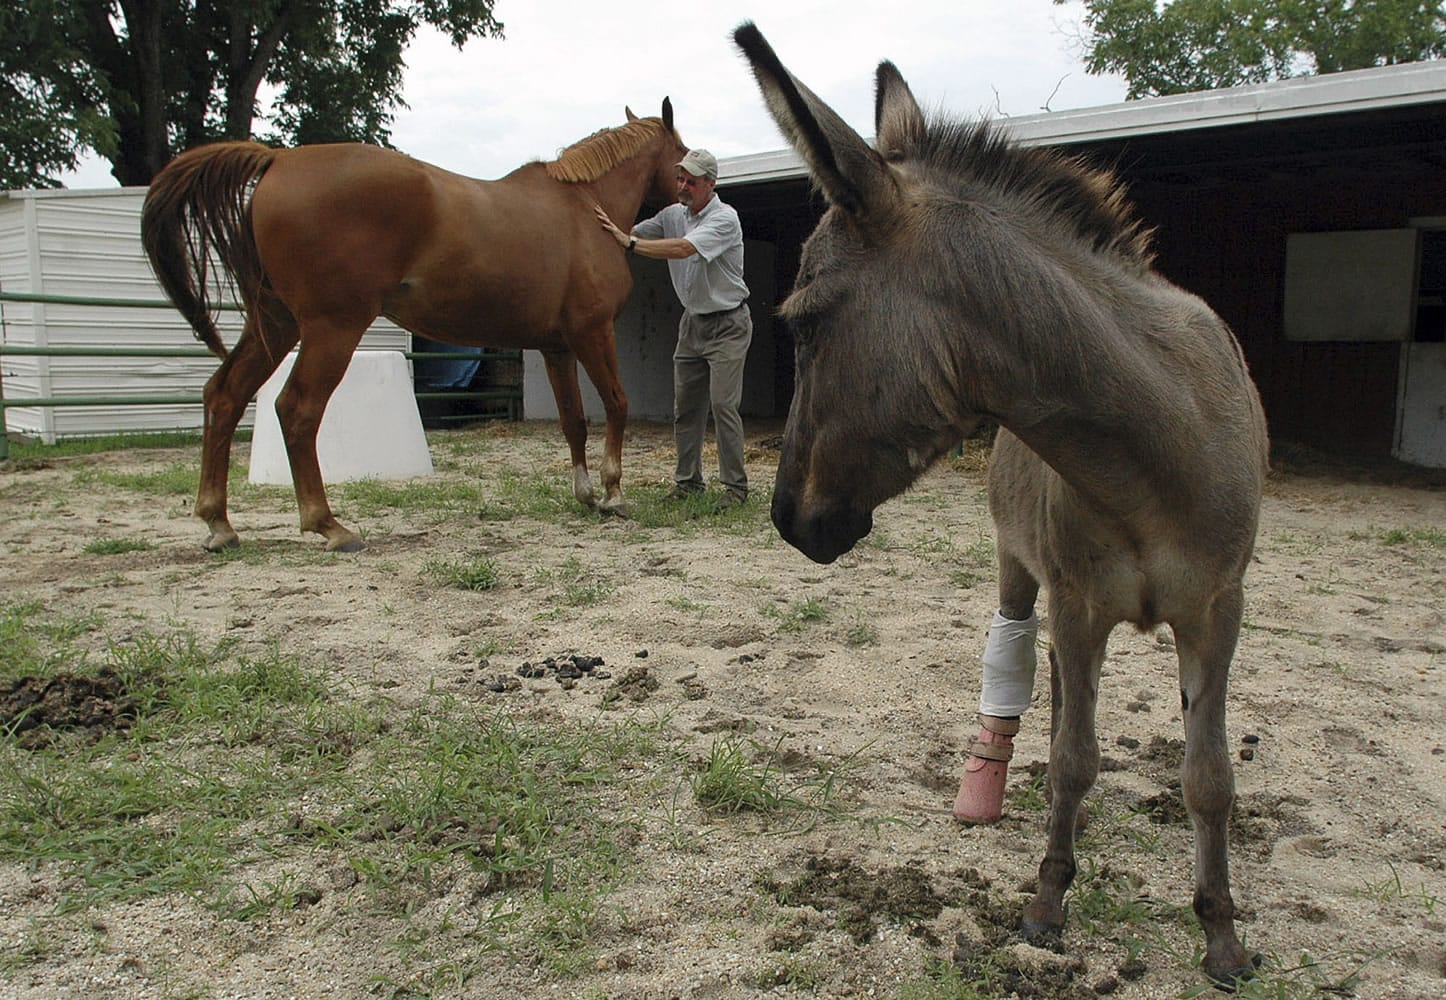 Emma the three-legged donkey looks on as veterinary equine expert Jim Brendemuehl works with his horse Tank in a corral in Auburn, Ala., on  July 11.